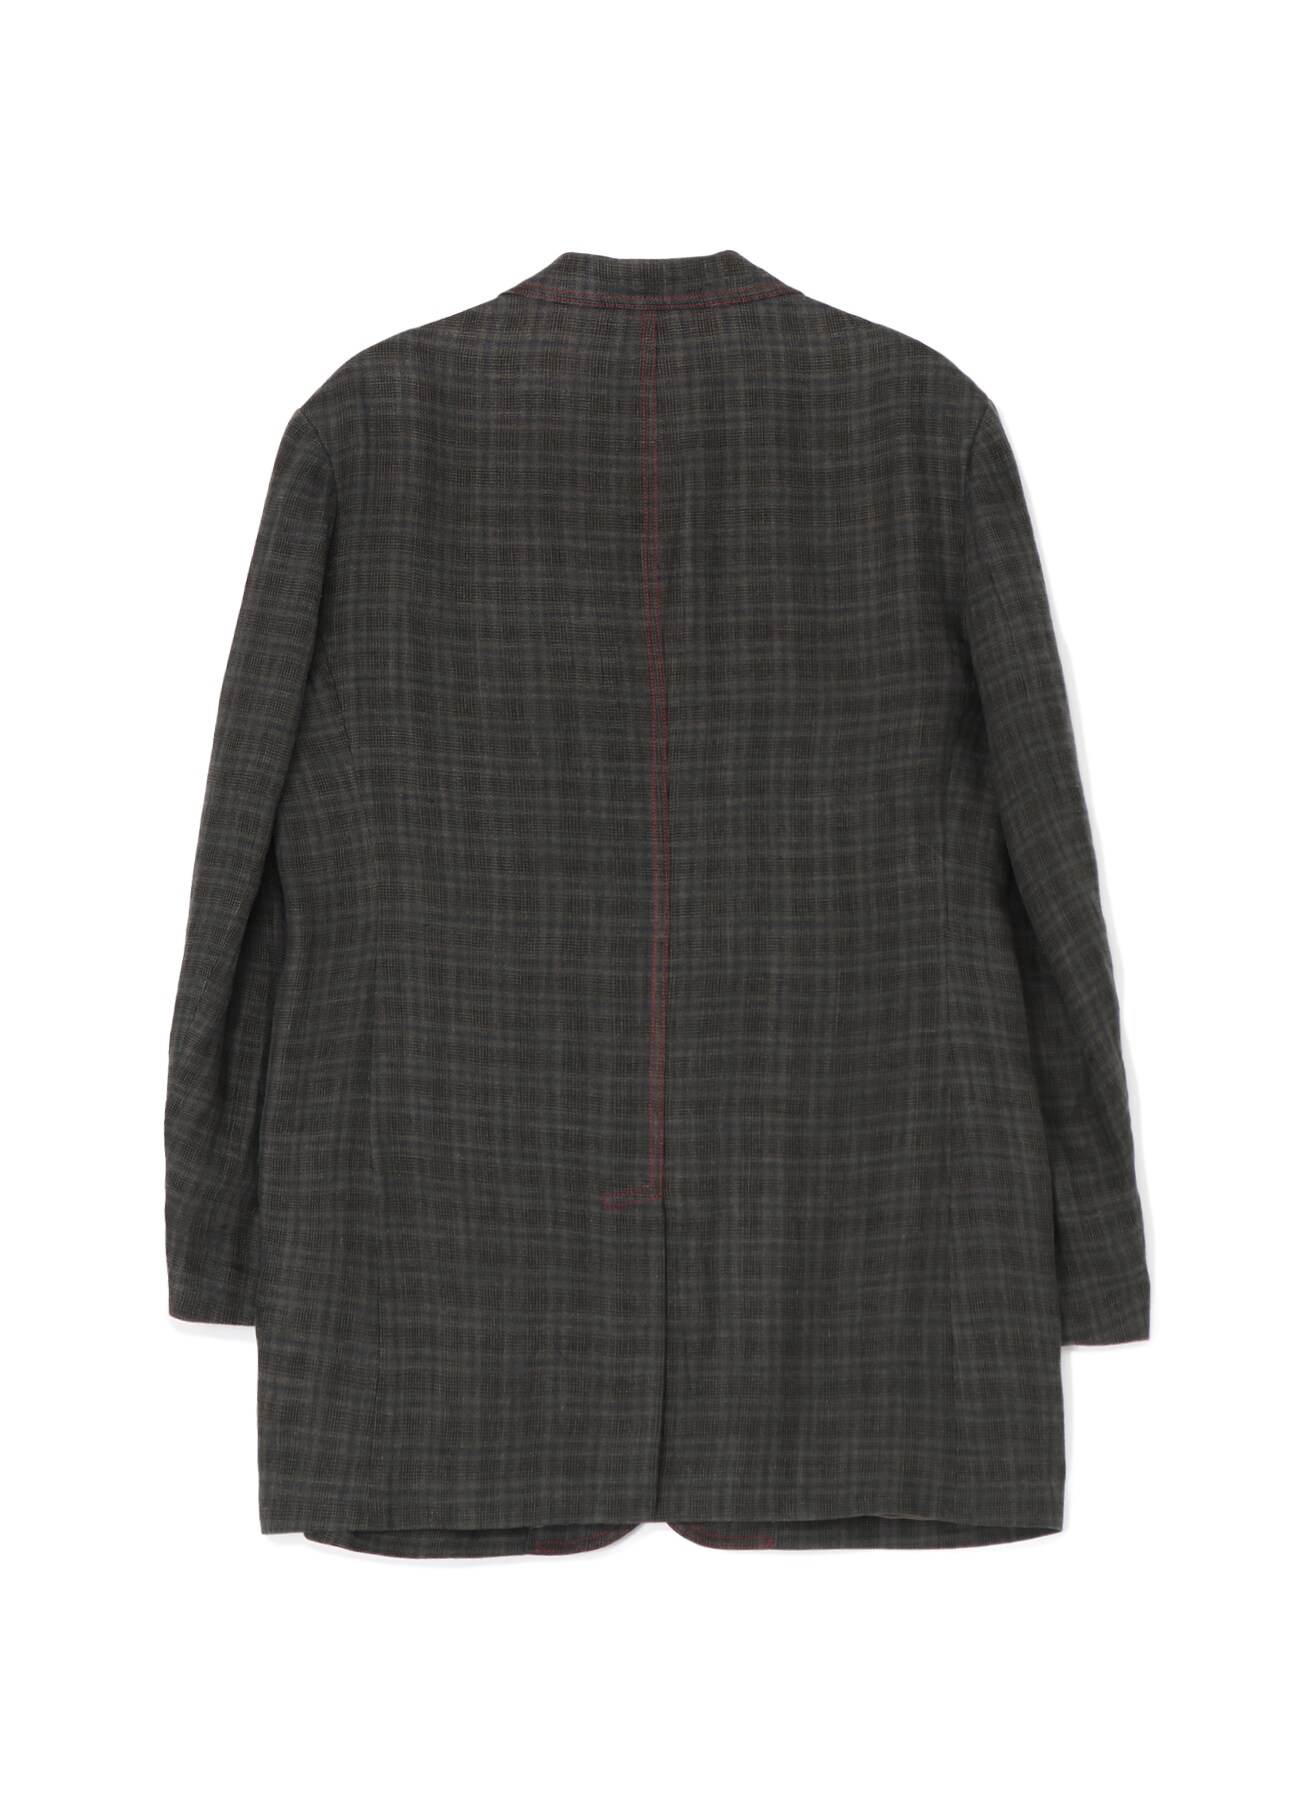 LINEN TWILL PLAID 4-POCKET JACKET WITH RED STITCHING(S Black): Y's 